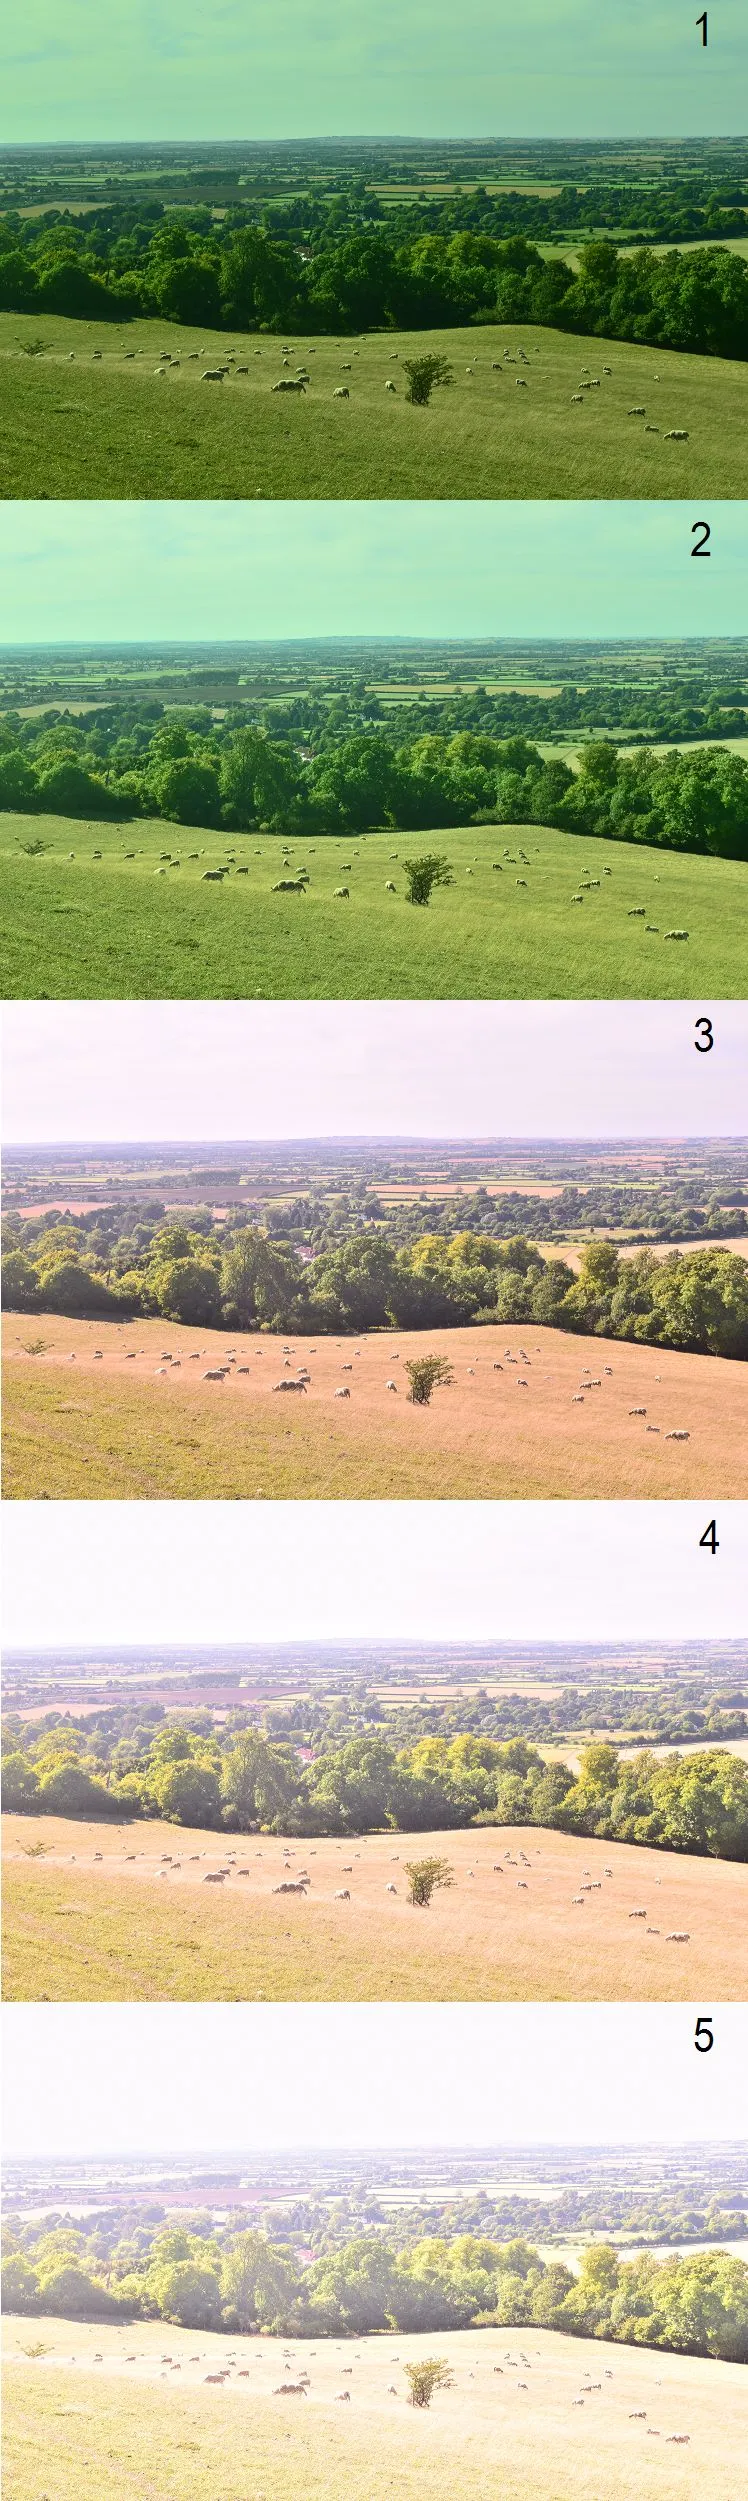 Nikon D5300 Exposure compensation photo examples, Chiltern Hills in UK